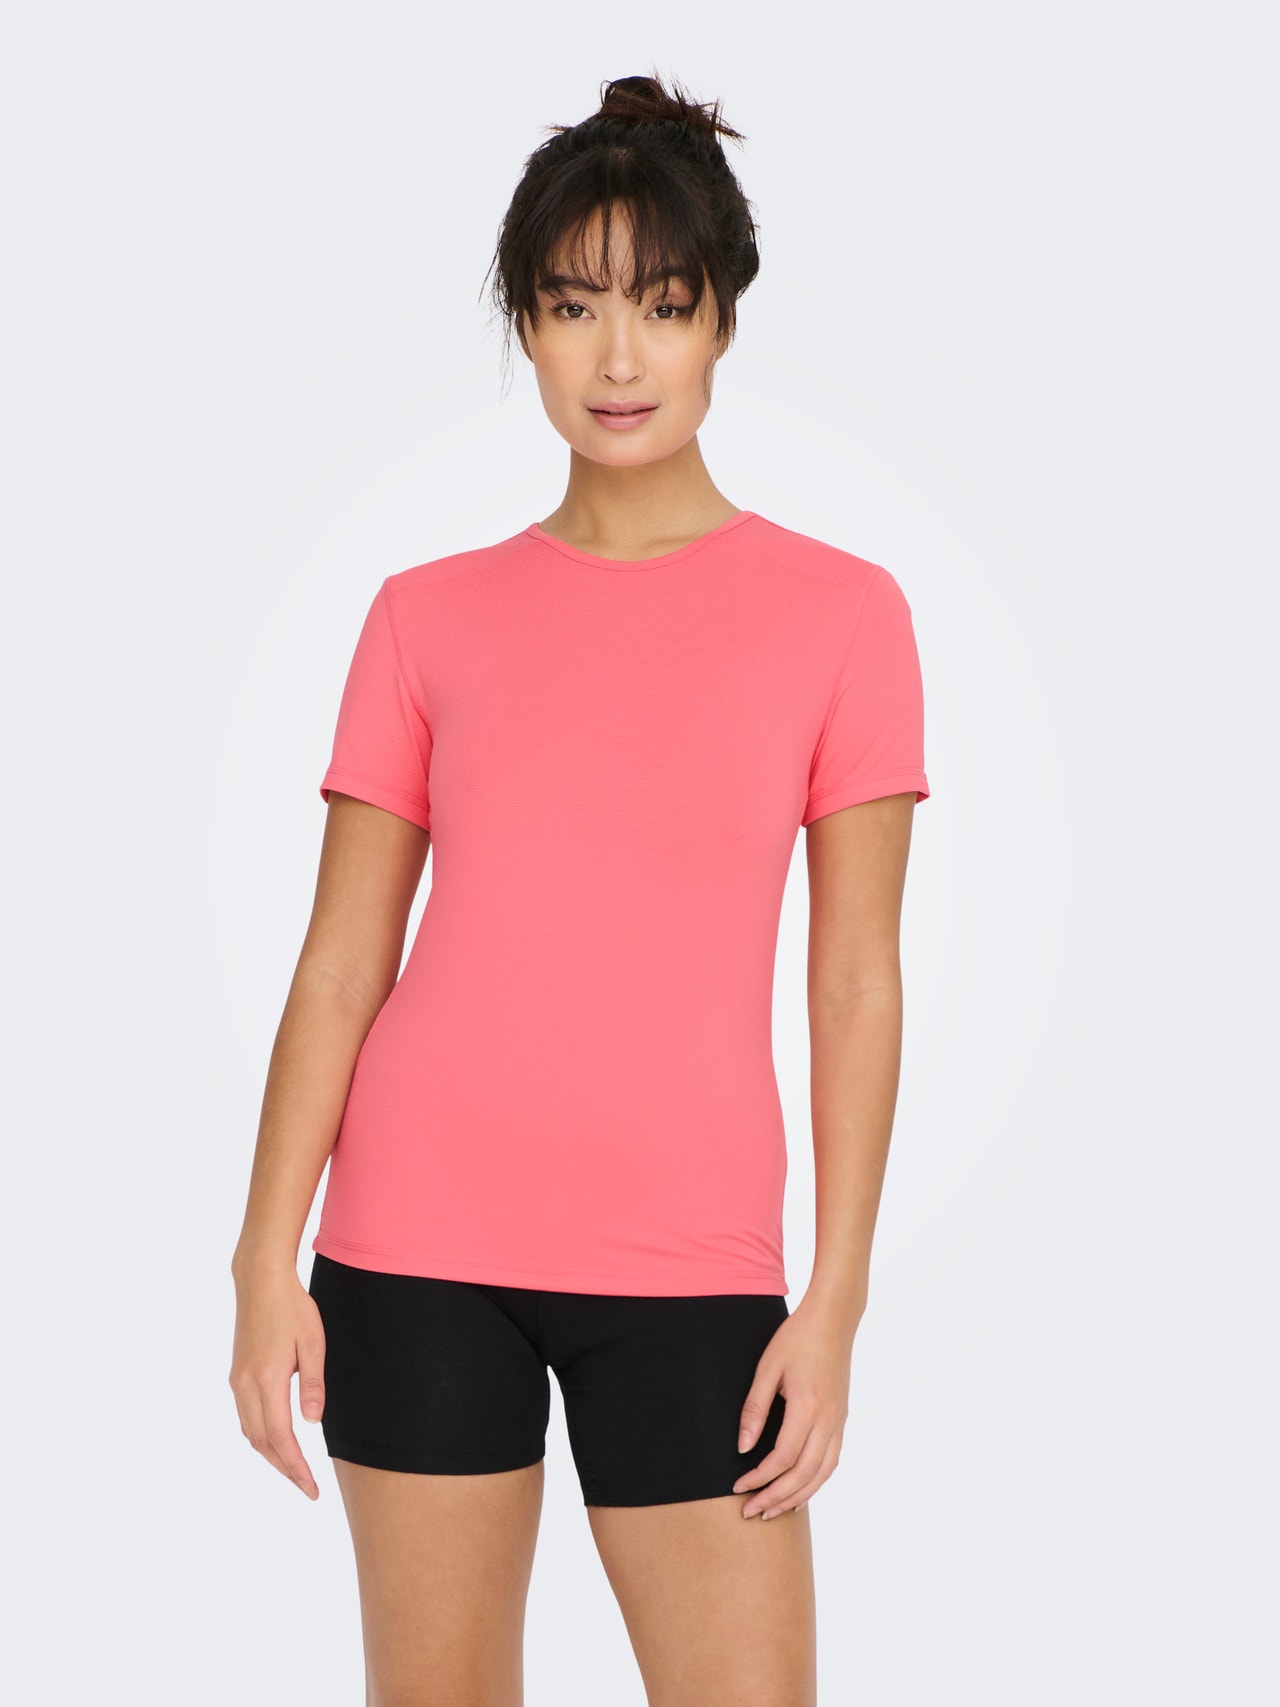 ONLY Solid colored Training Tee -Sun Kissed Coral - 15283412